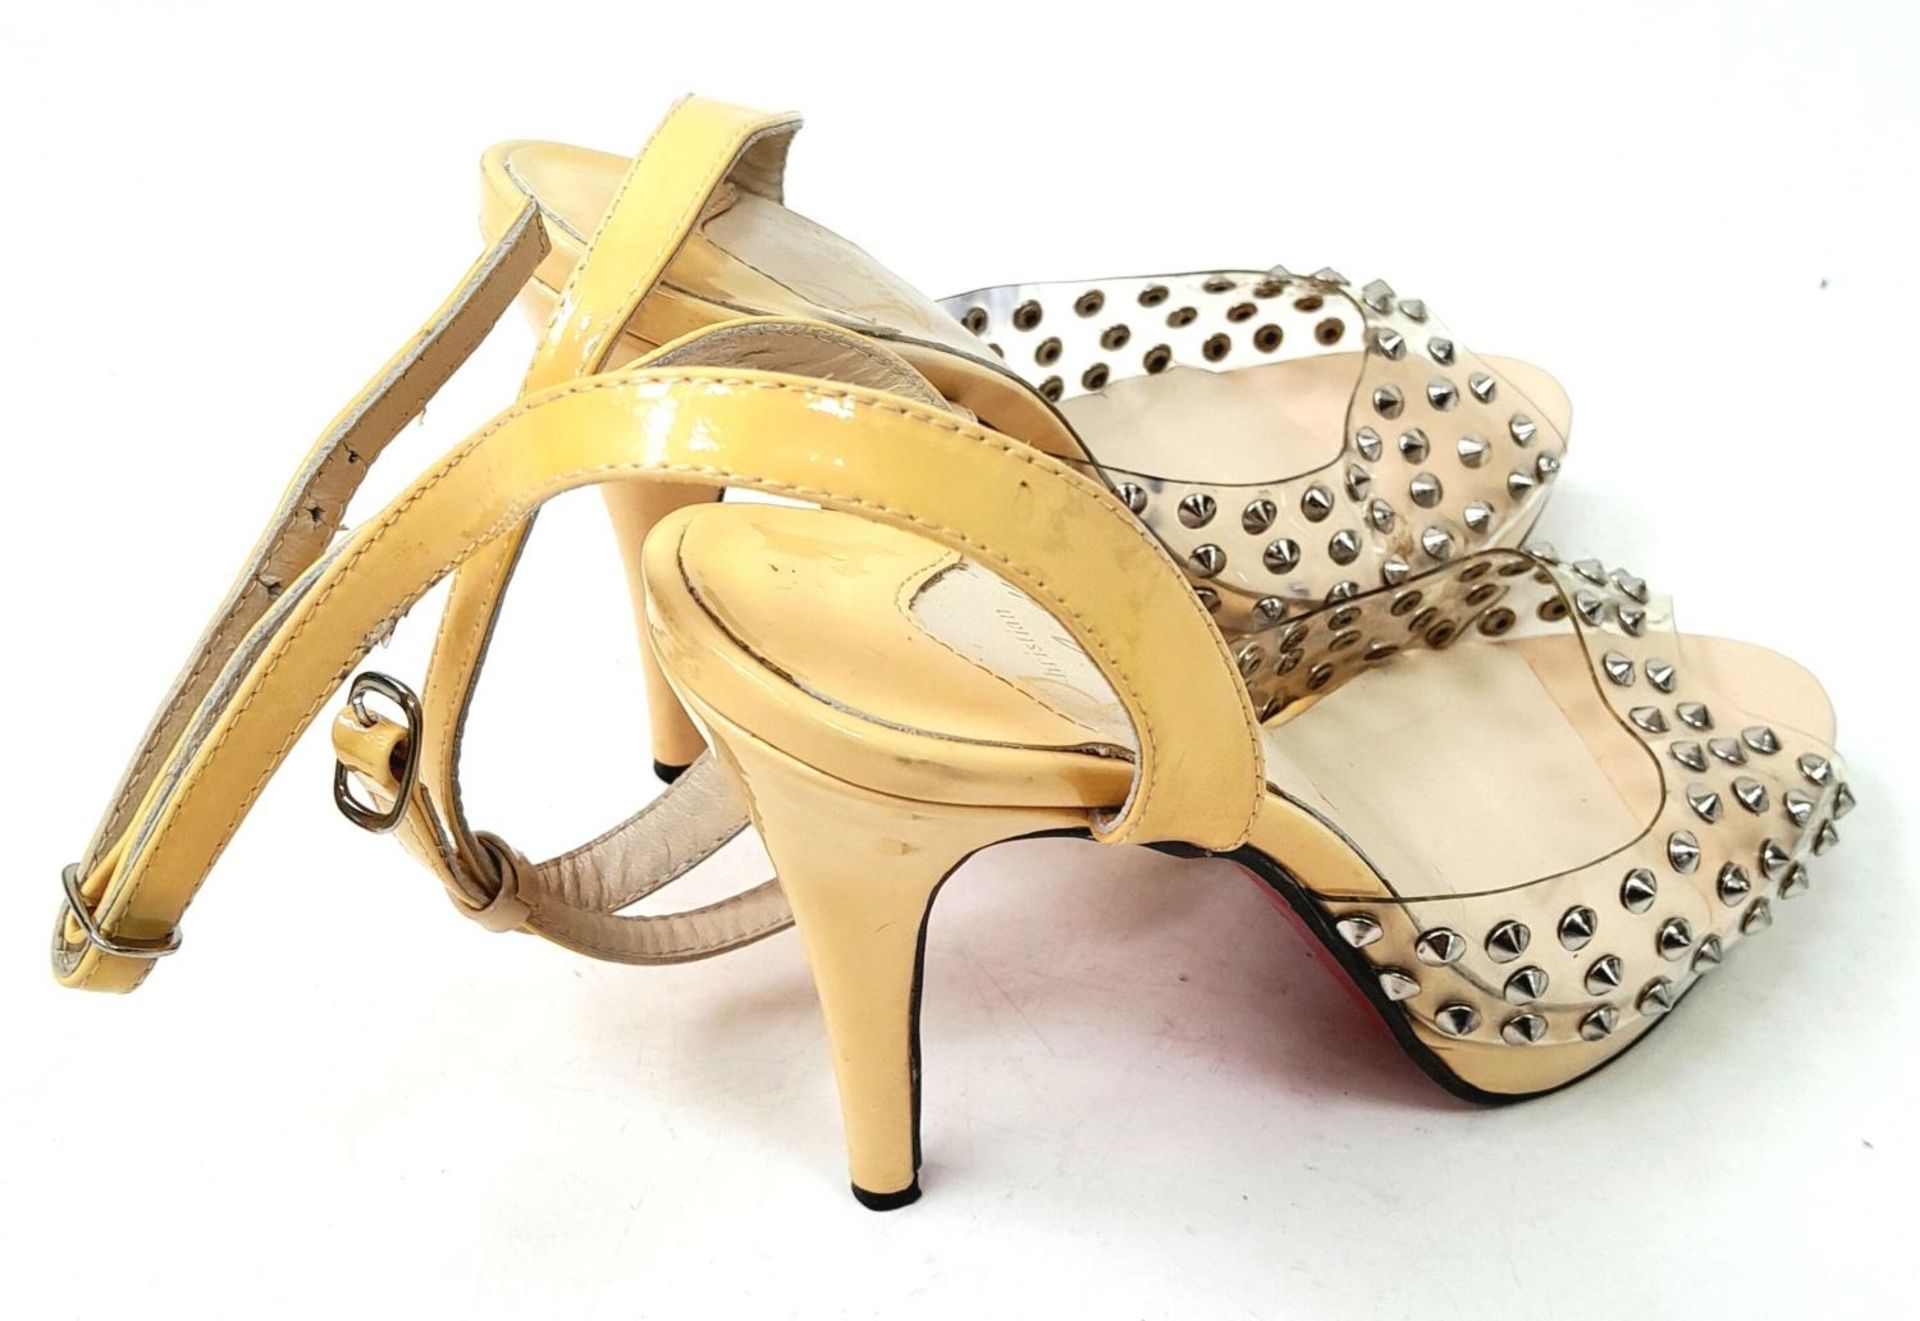 A pair of lightly used high heel (4inch) shoes by Louboutin. - Image 2 of 8